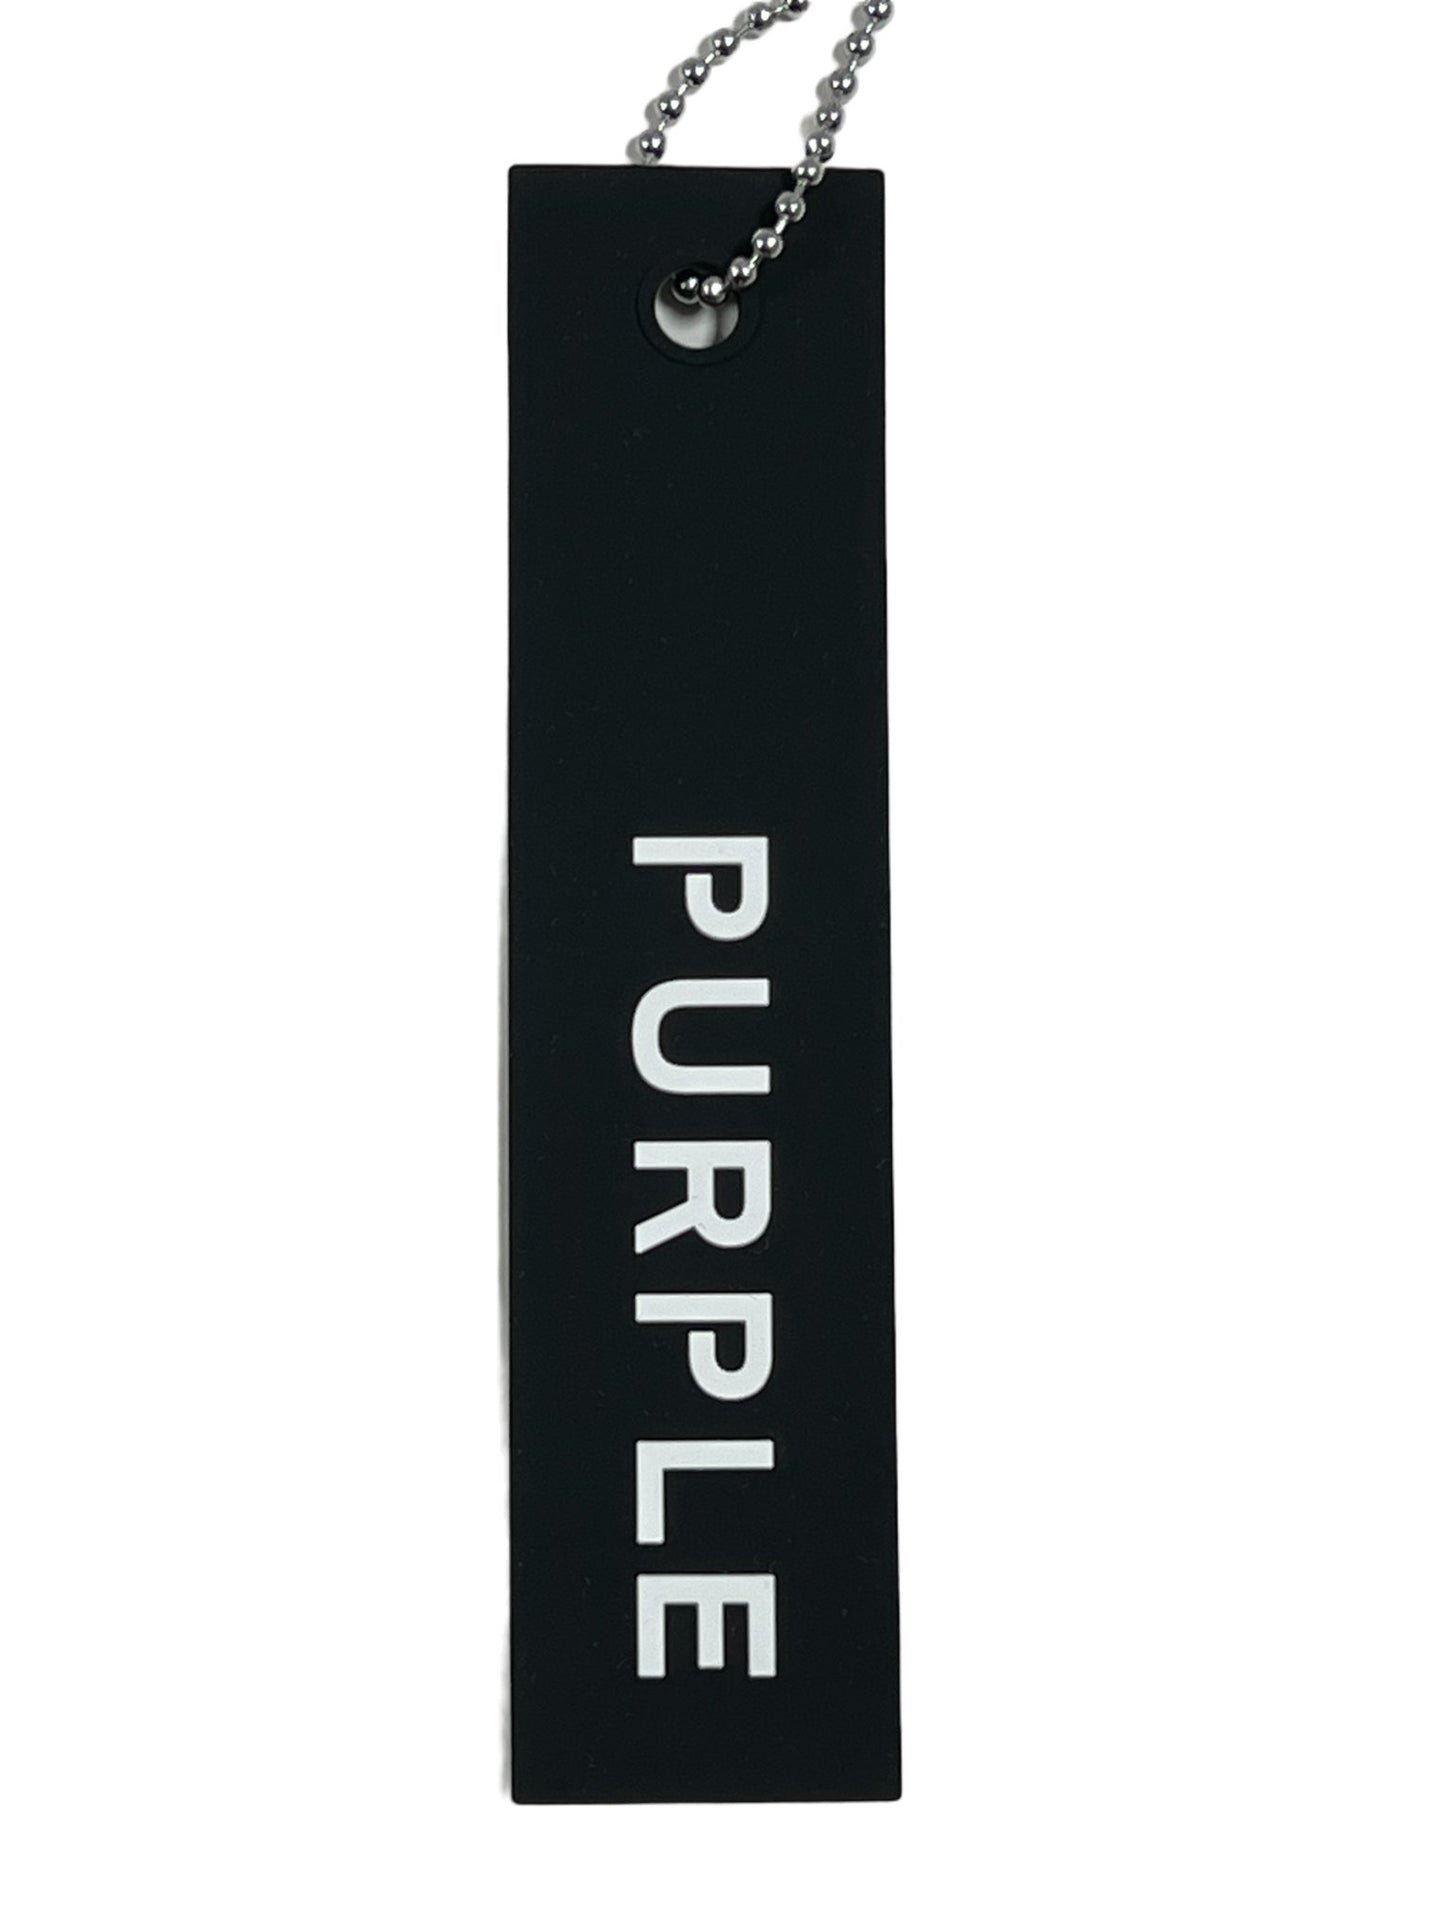 Black tag with the word "purple" printed on it, hanging from a metal ball chain of a PURPLE BRAND P504-PBUC ALL ROUND SHORT BLACK swim trunks.